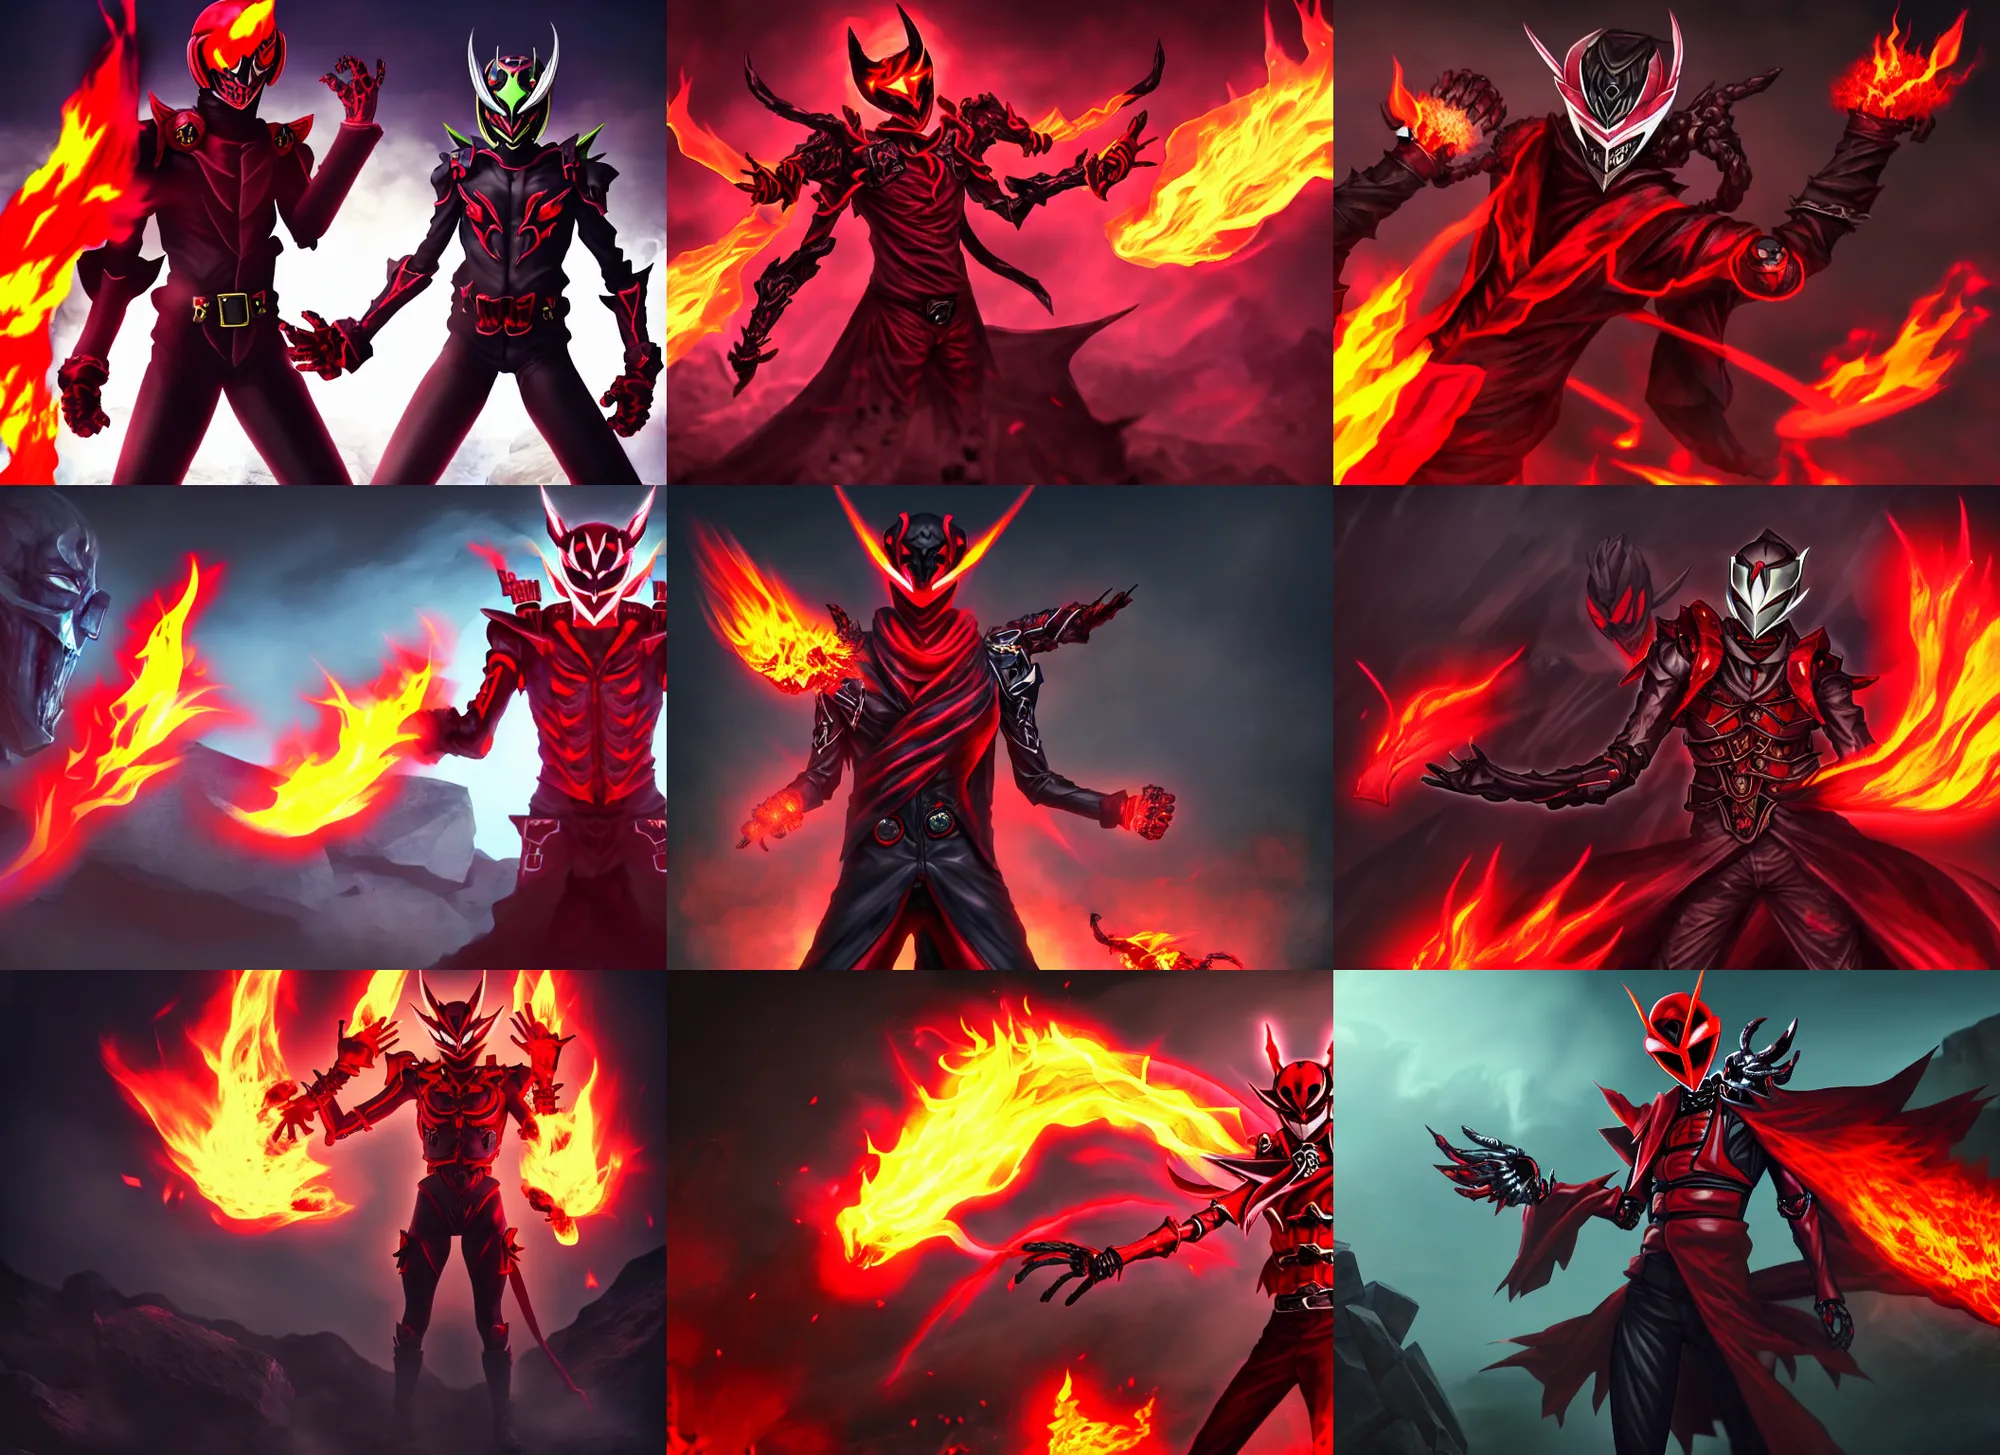 Prompt: Demonic Kamen Rider with a red scarf made of fire billowing behind him and Skull Gauntlets on his hands standing in a rock quarry, full body single character, League of Legends Character Splash Art, high quality, 4k, concept art, illustration, rubber suit, Arcane style, value control,